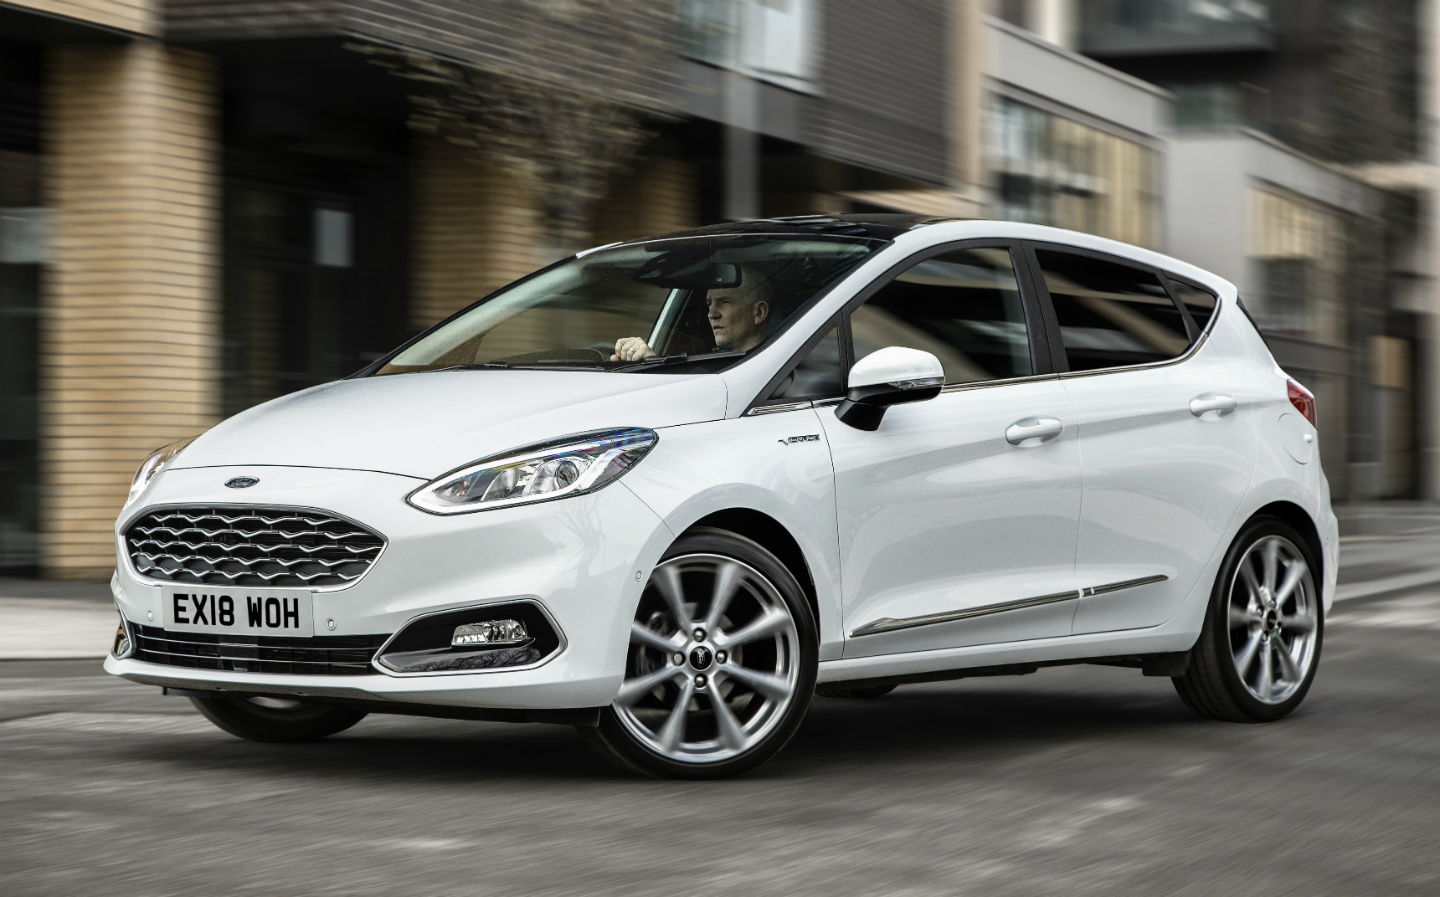 Sunday Times Motor Awards 2019: Best Citycar and Small Car of the Year. Ford Fiesta